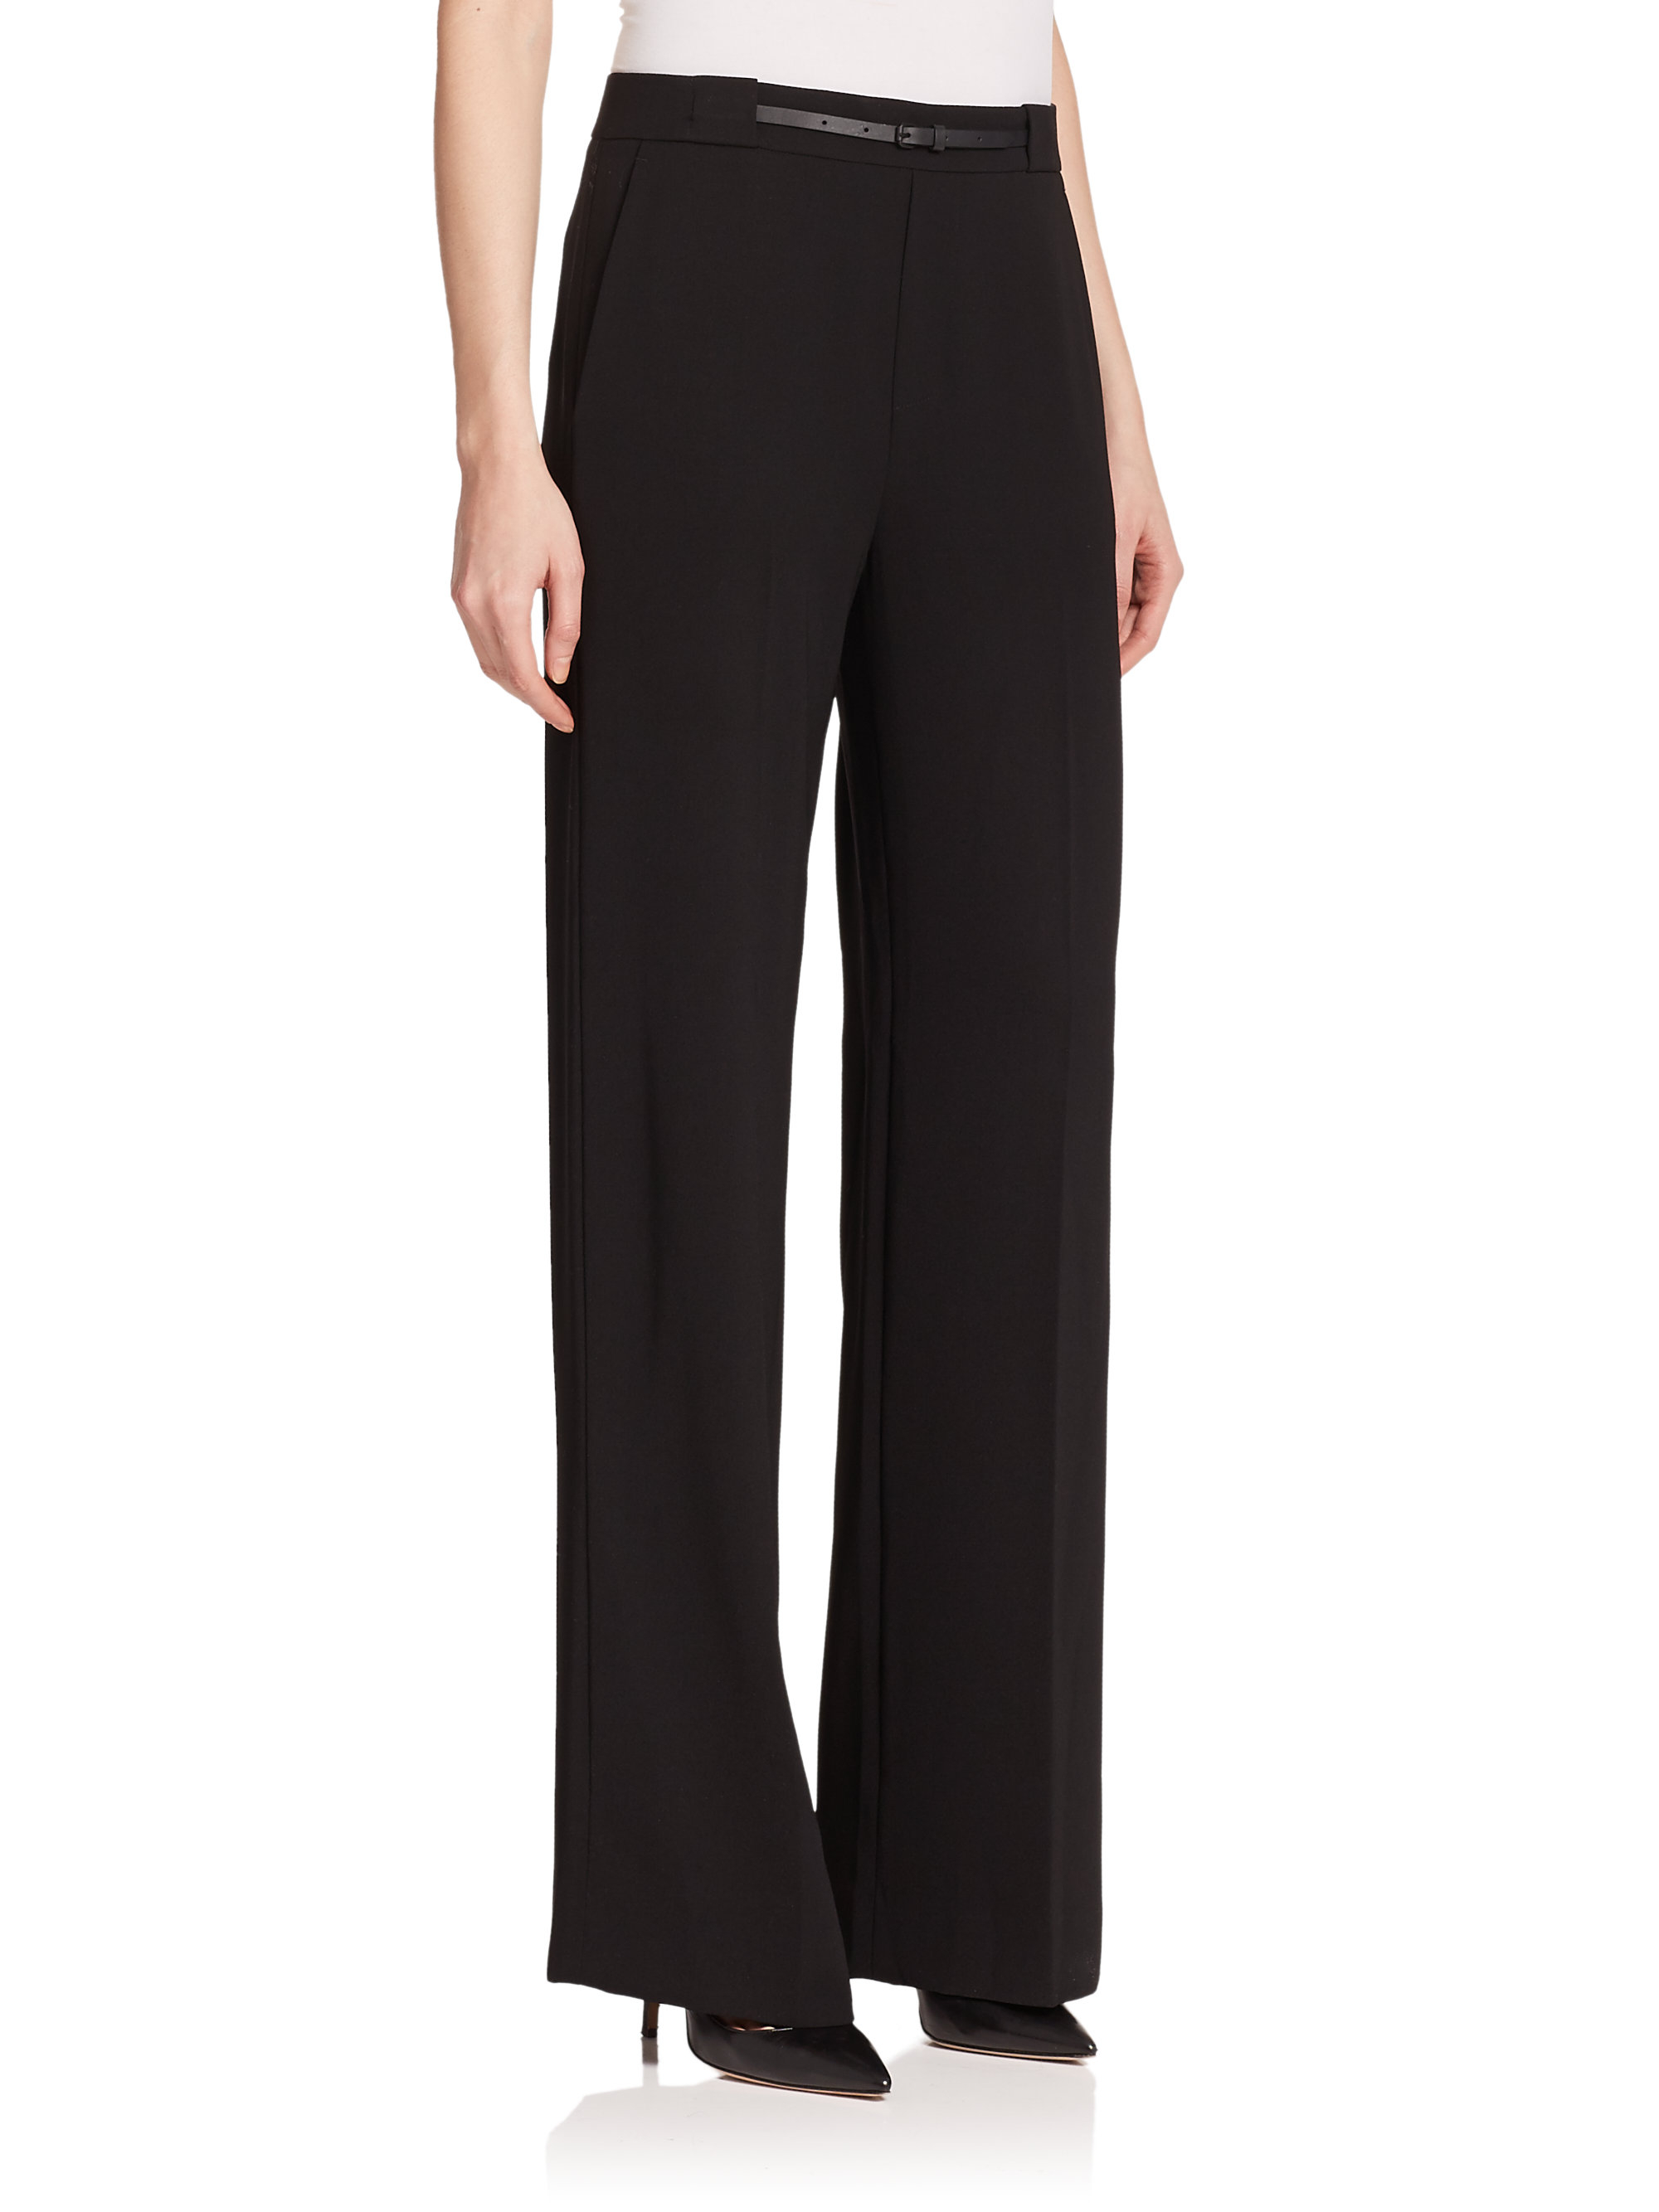 Lyst - Vince Belted High-waist Pants in Black